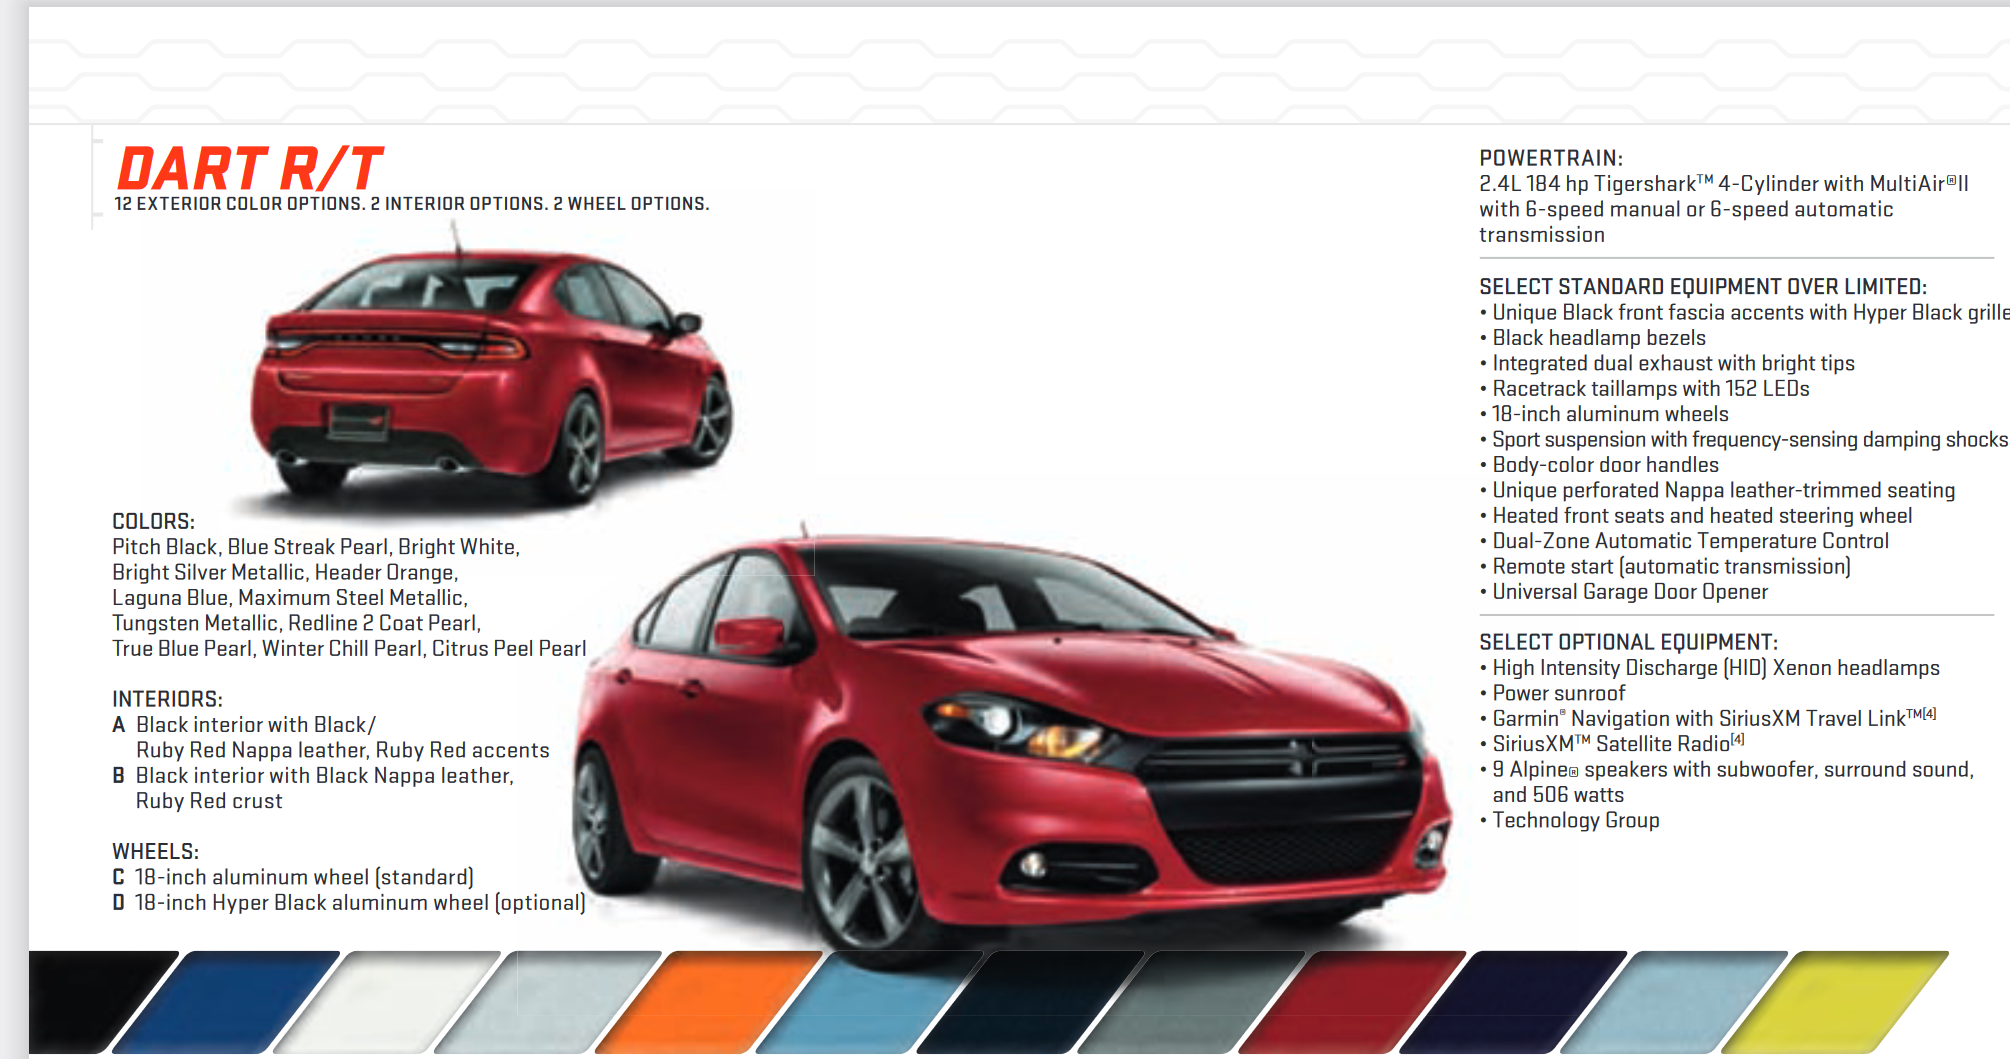 exterior colors used on the dodge dart